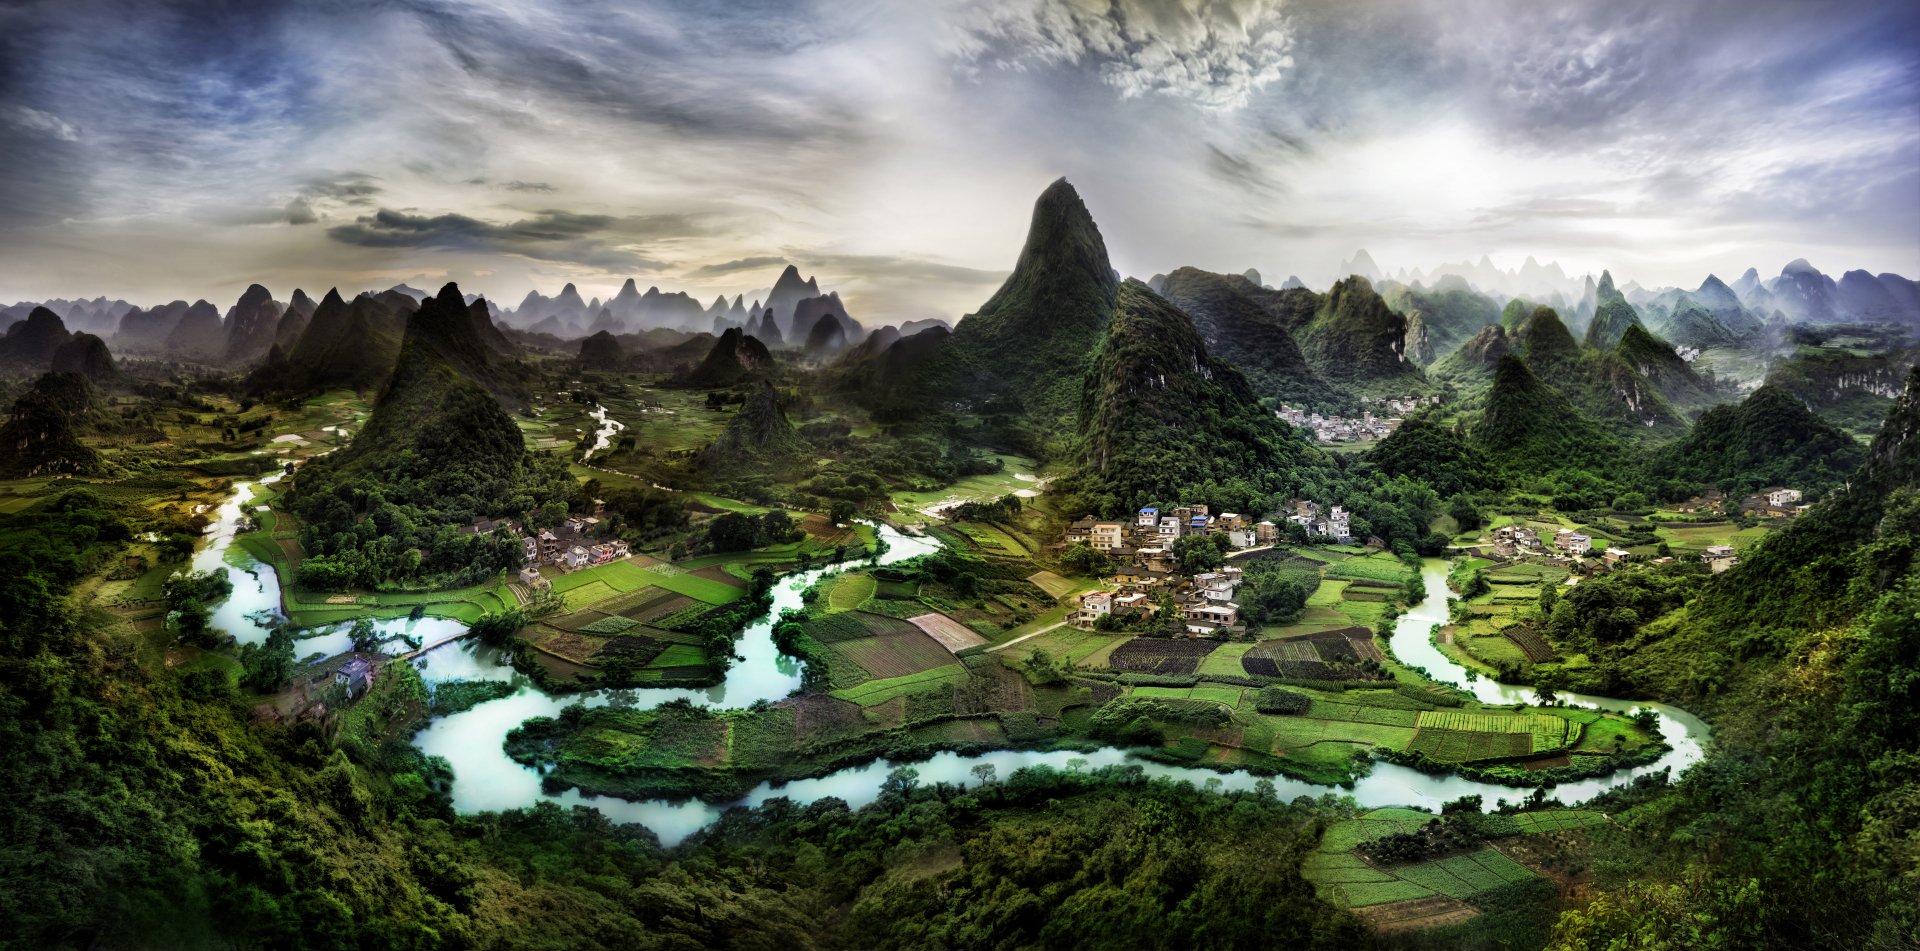 China Hd Wallpapers Background Images, Beautiful Chinese Landscape Wallpaper Pictures